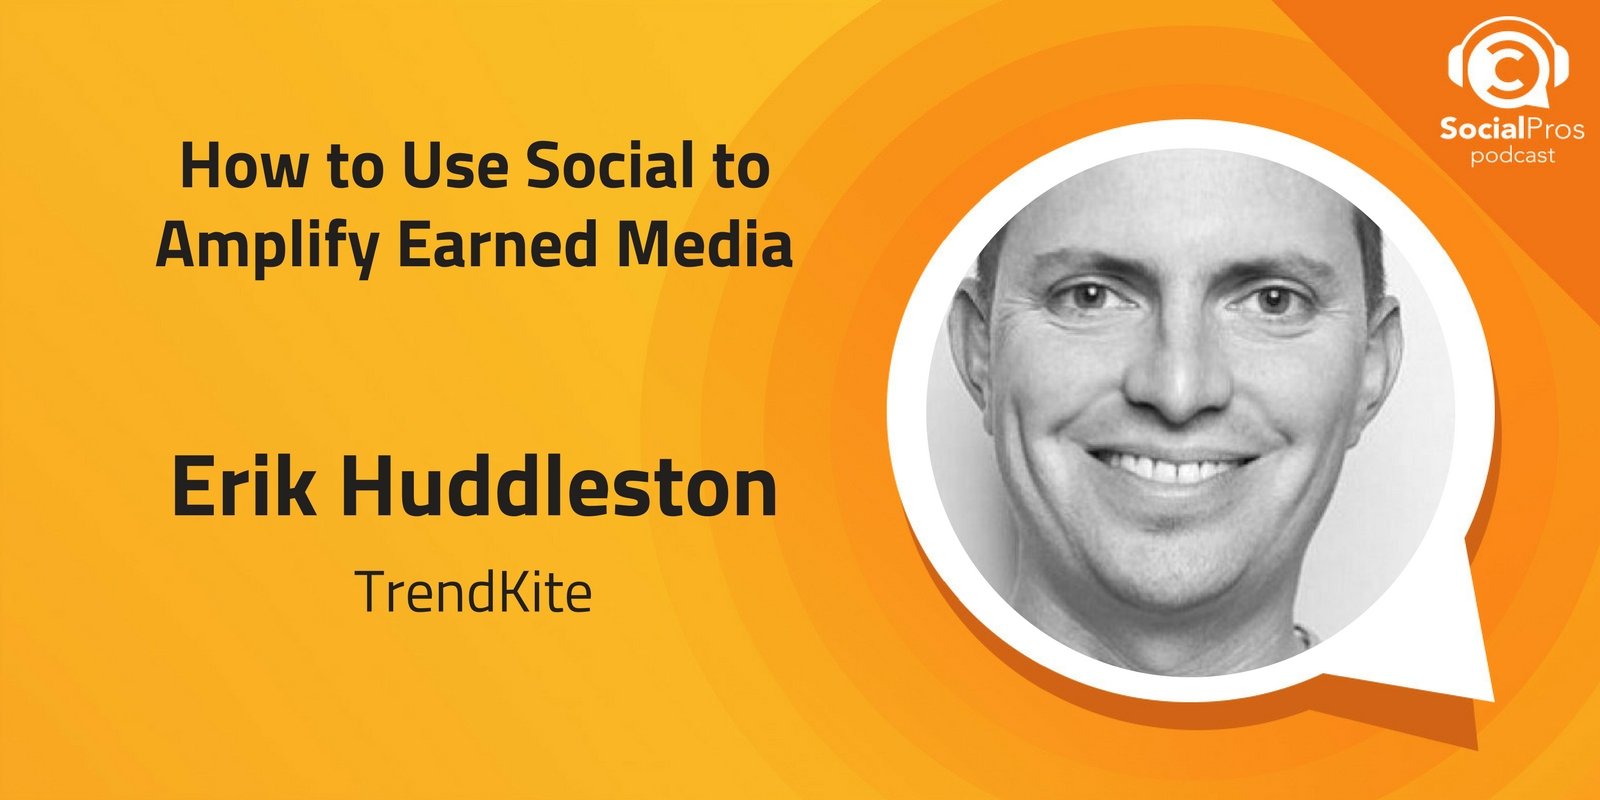 How to Use Social to Amplify Earned Media